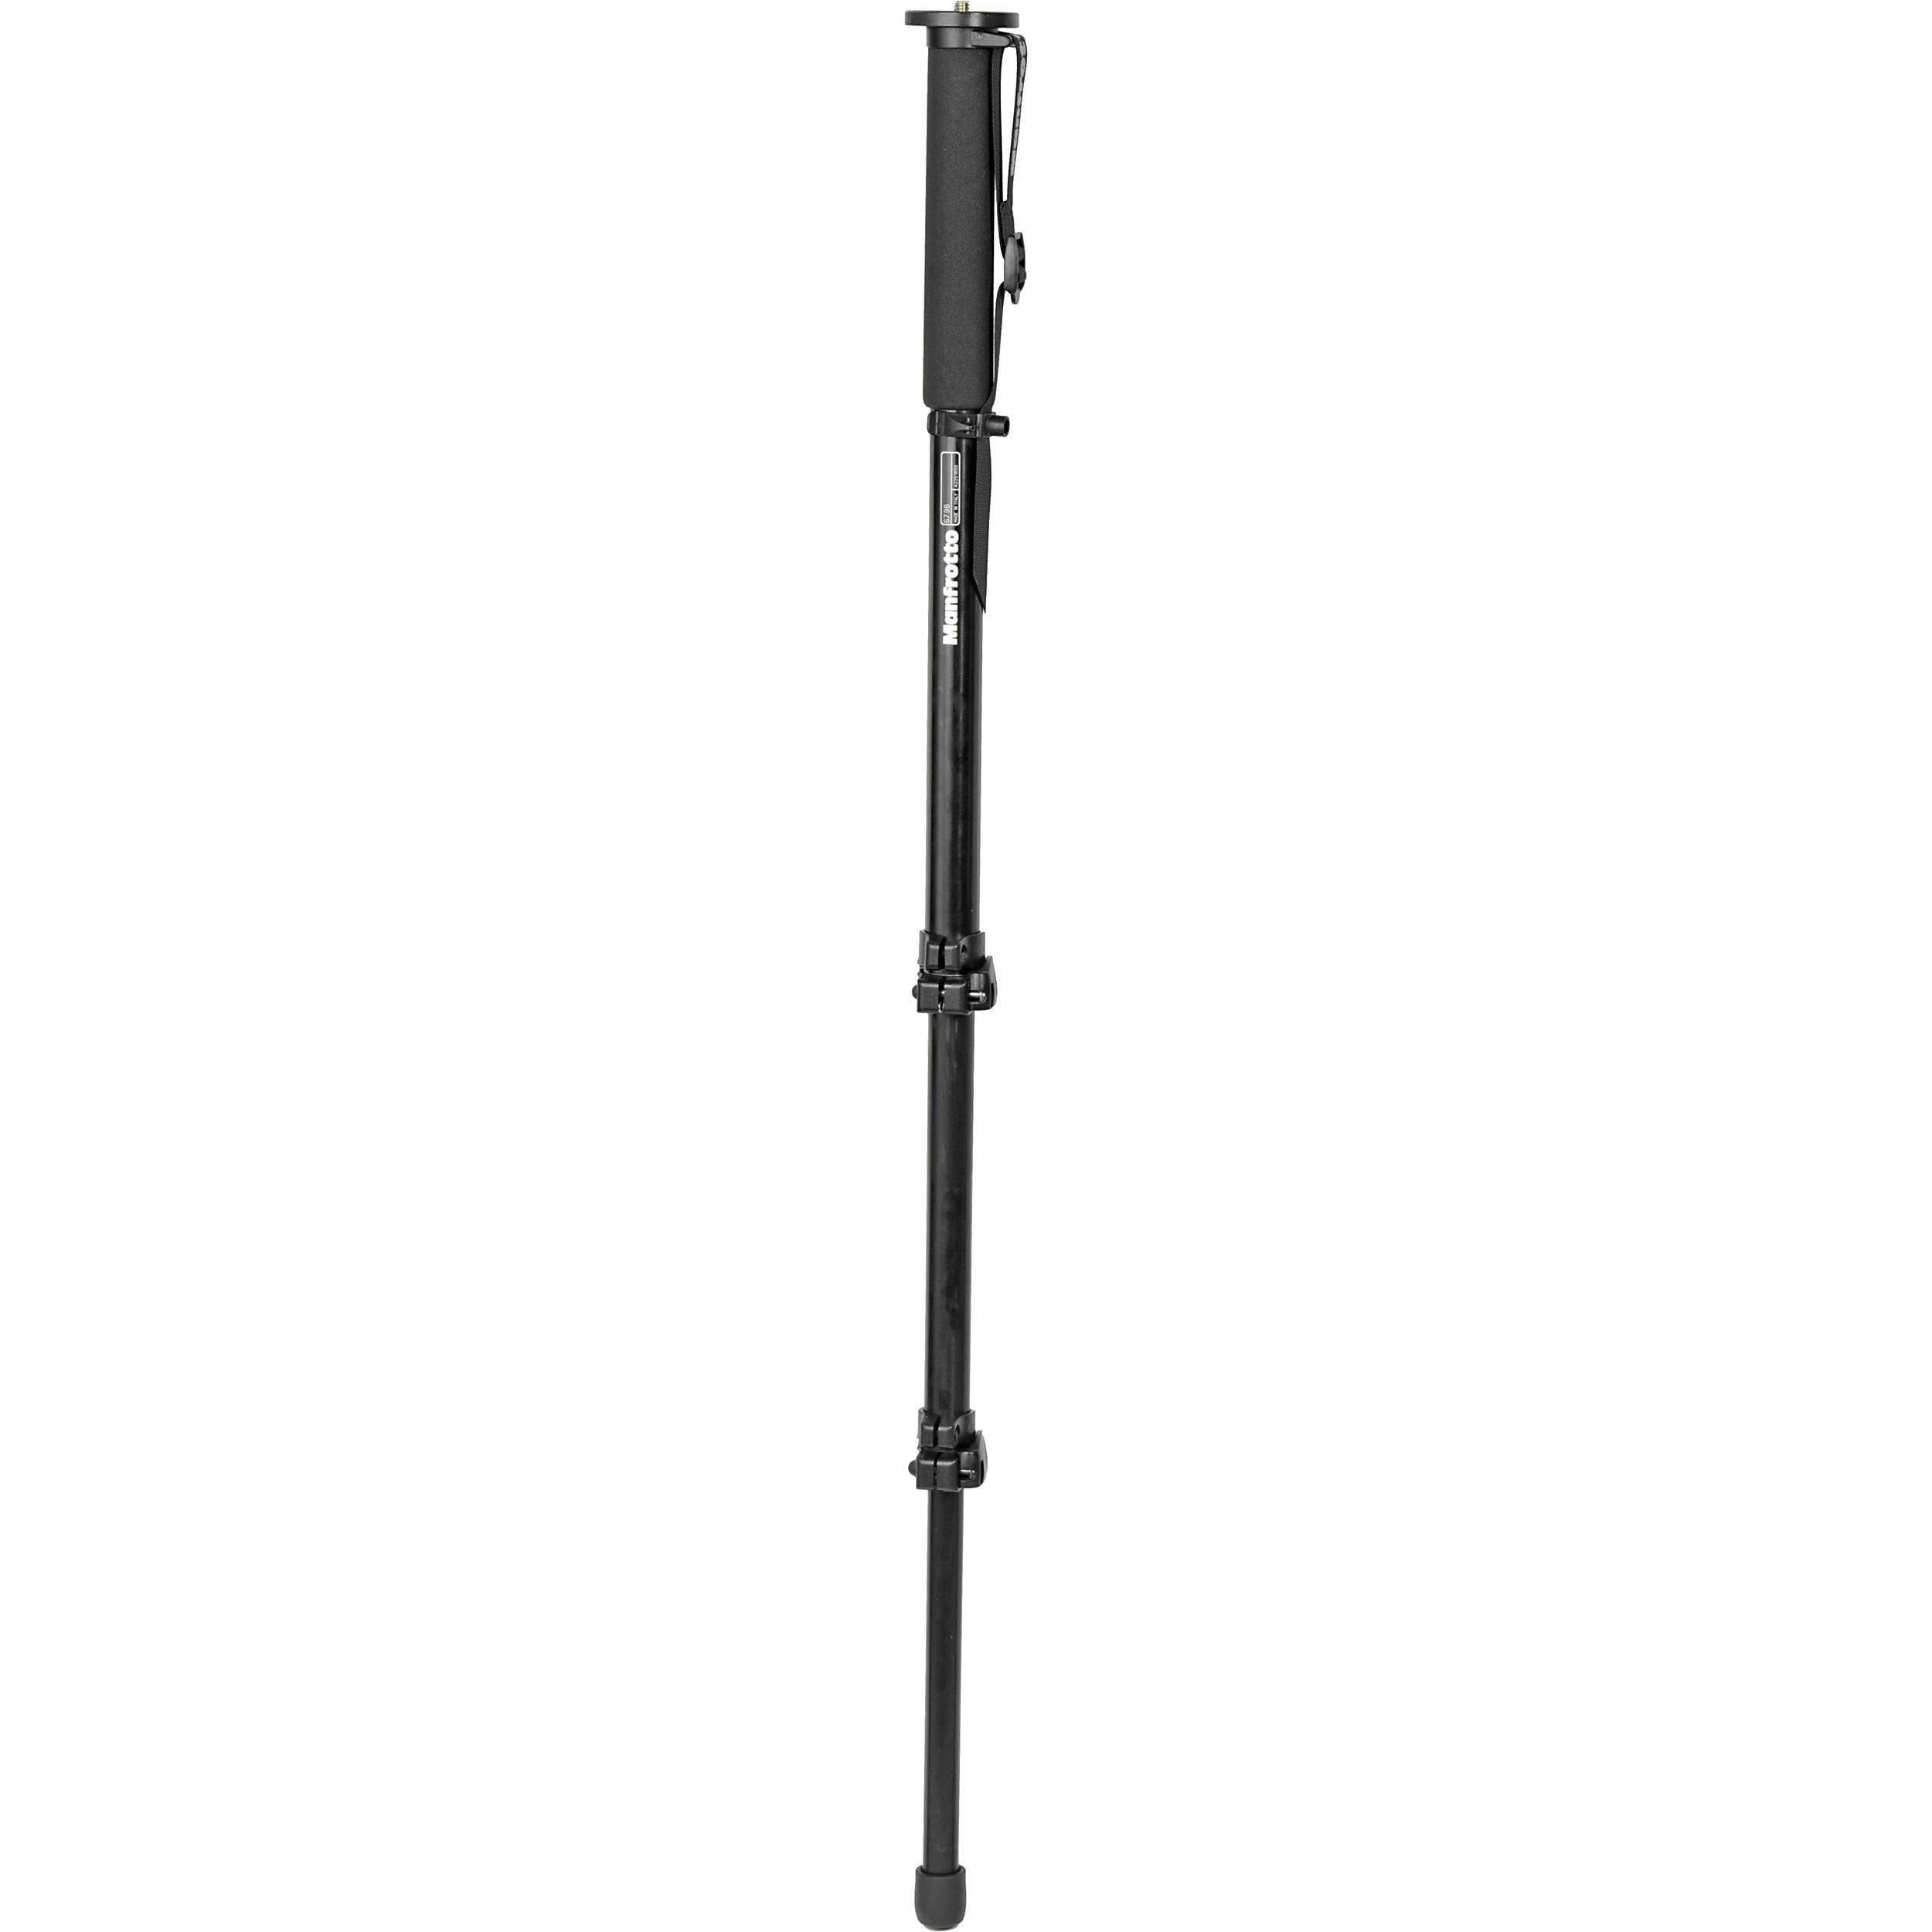 Manfrotto 679B - 3 Section Classic Monopod